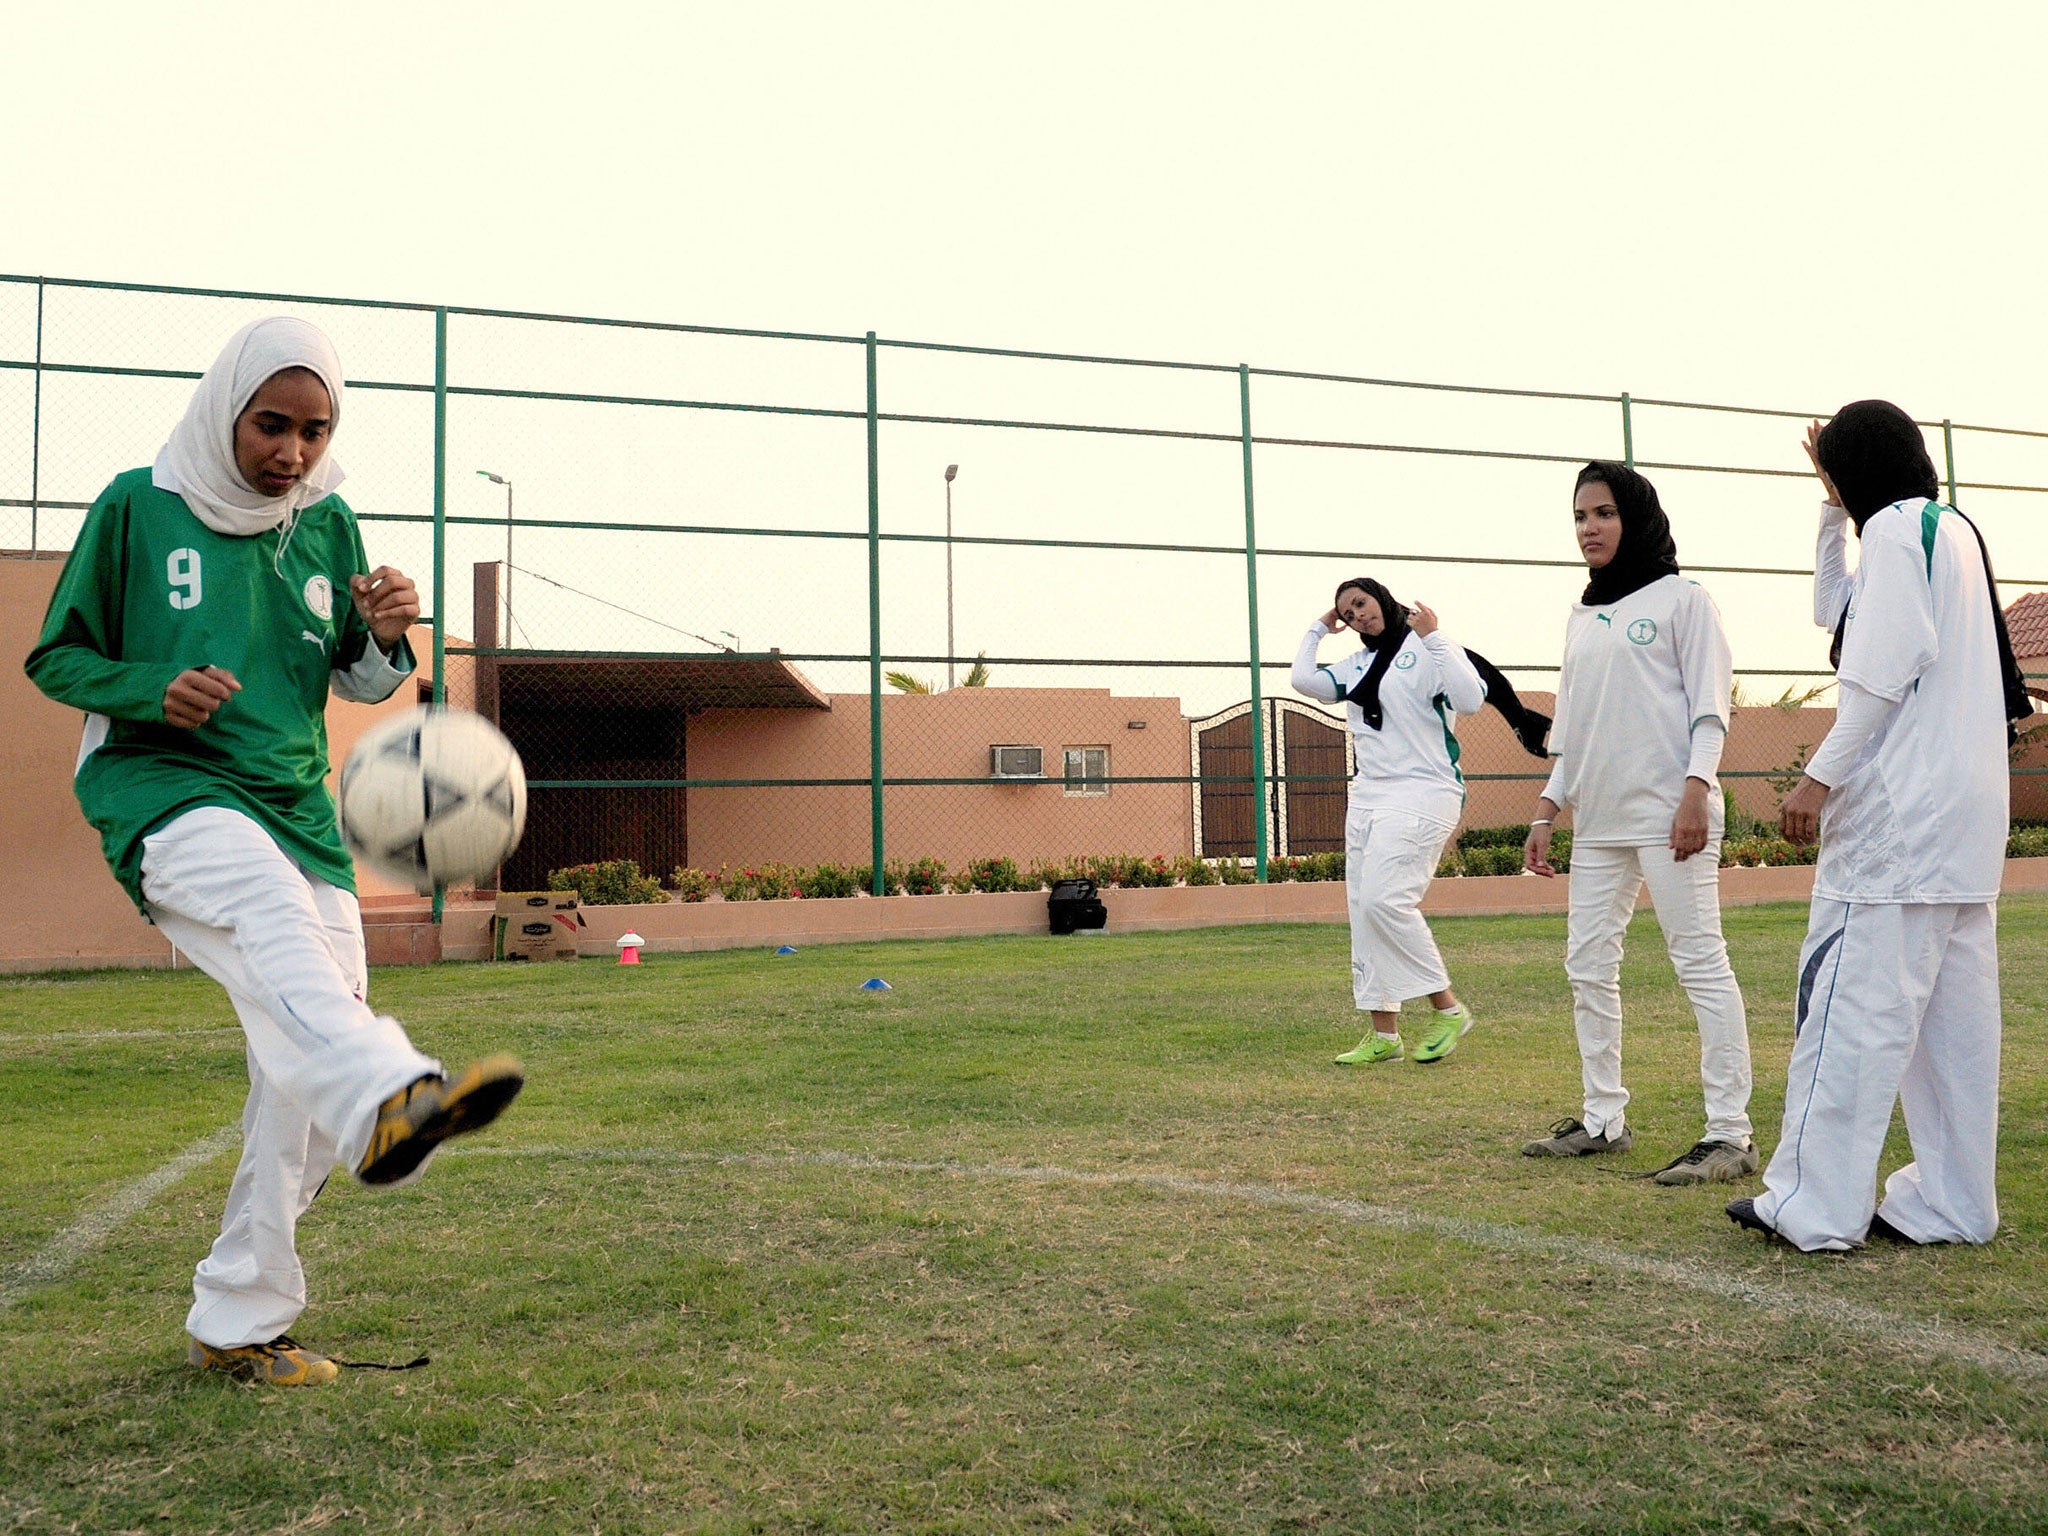 Saudi girls will be allowed to play sport in private schools for the first time